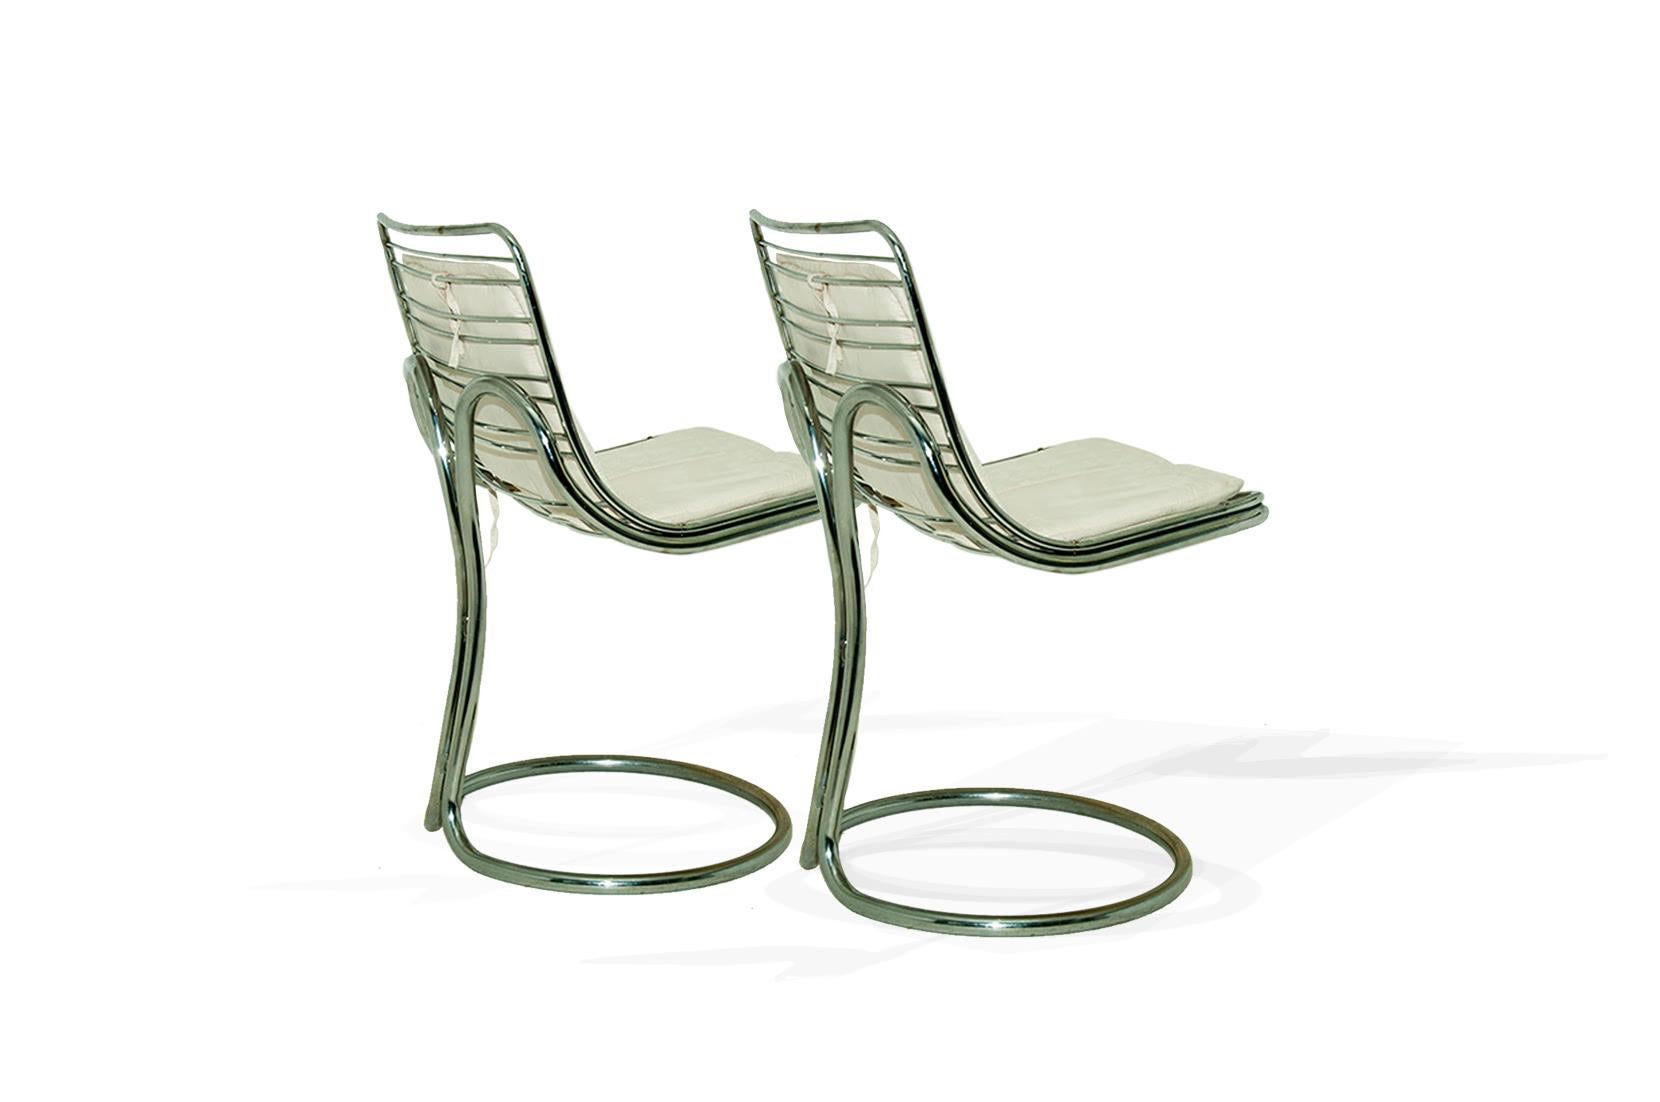 These chairs has, an extraordinary sculptural shape, made by the twist of the chromed metal tubes, in the back. The seats are covered with an amovible white Alcantara cover.
The feet are in circle, a round shape, with the tubes forming a circle.